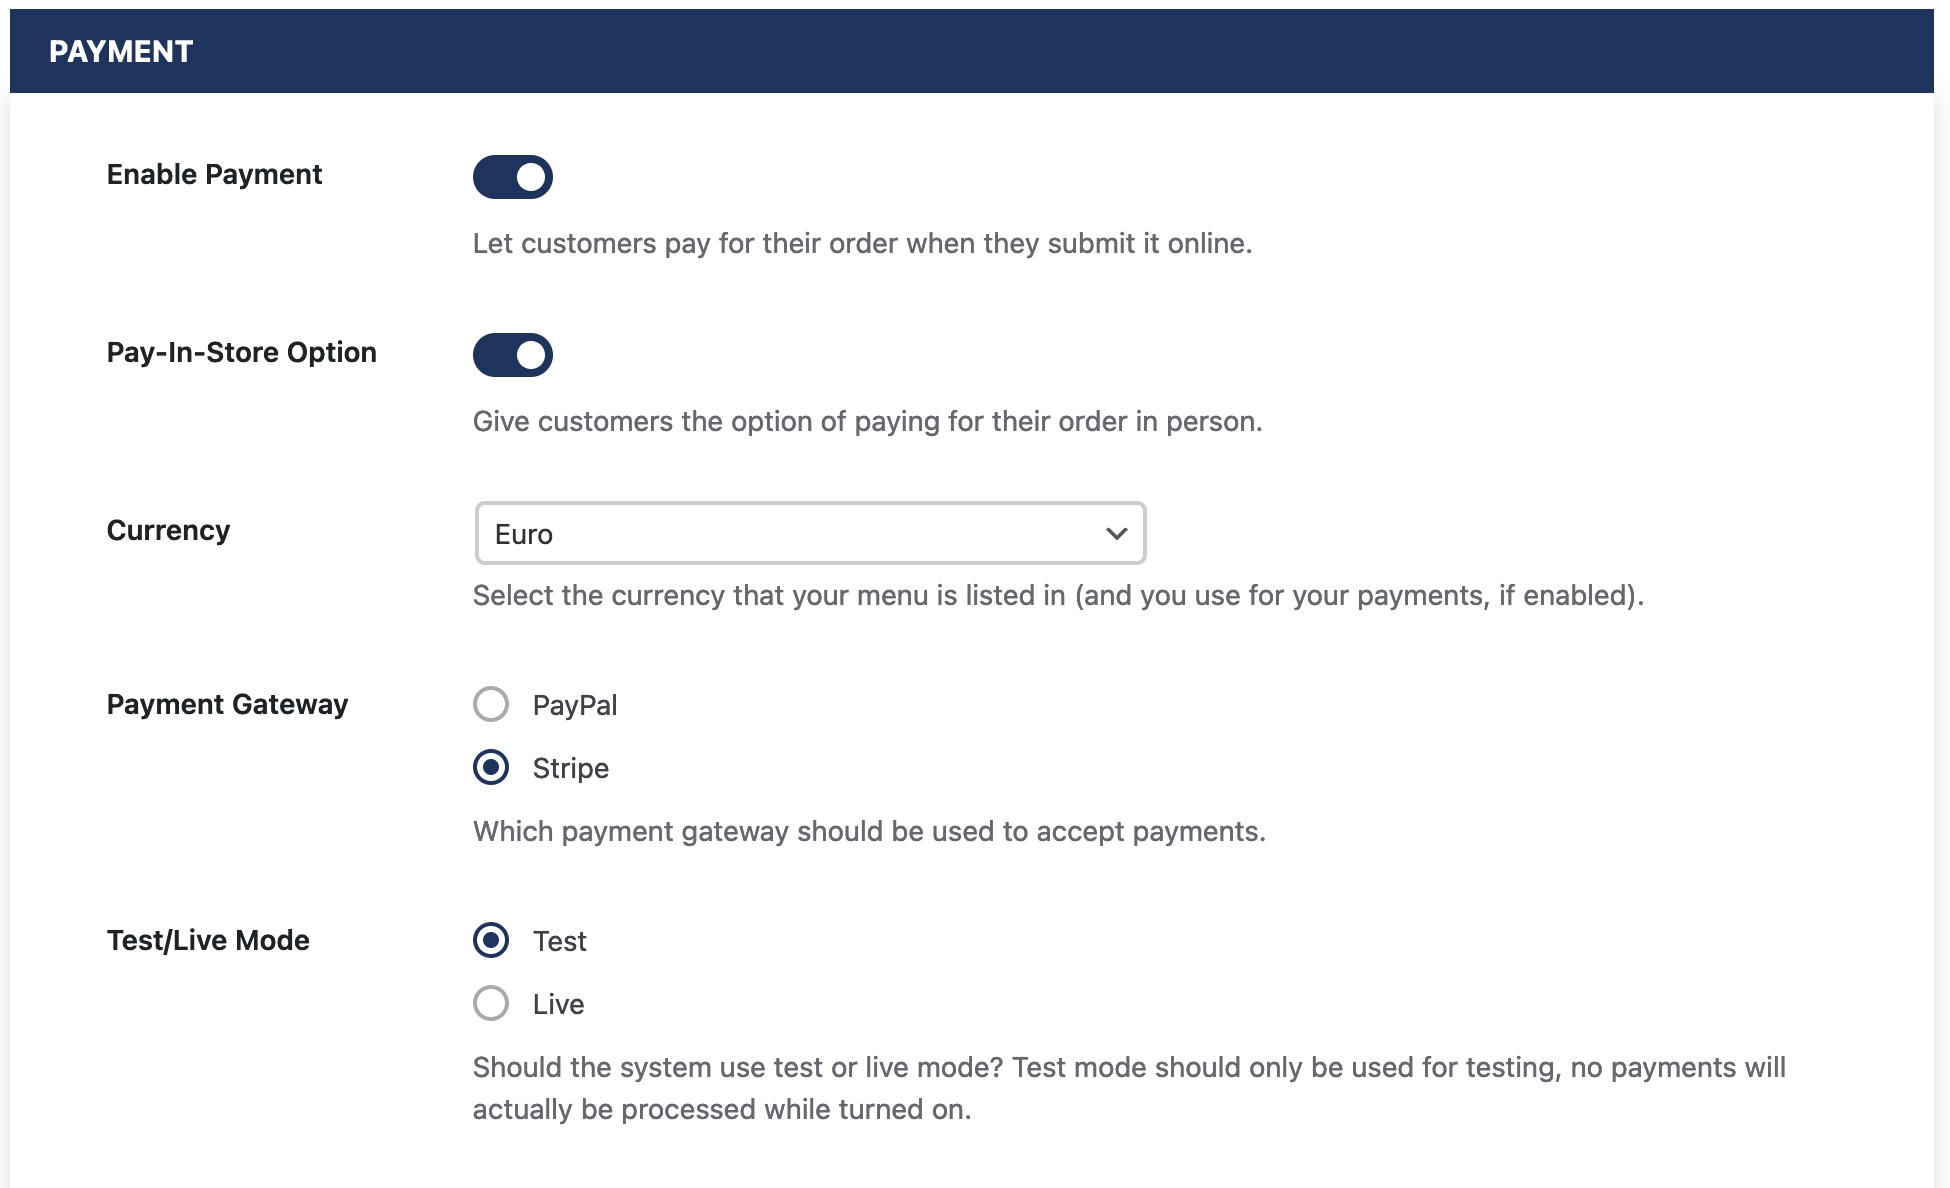 Screenshot of the payment ordering options